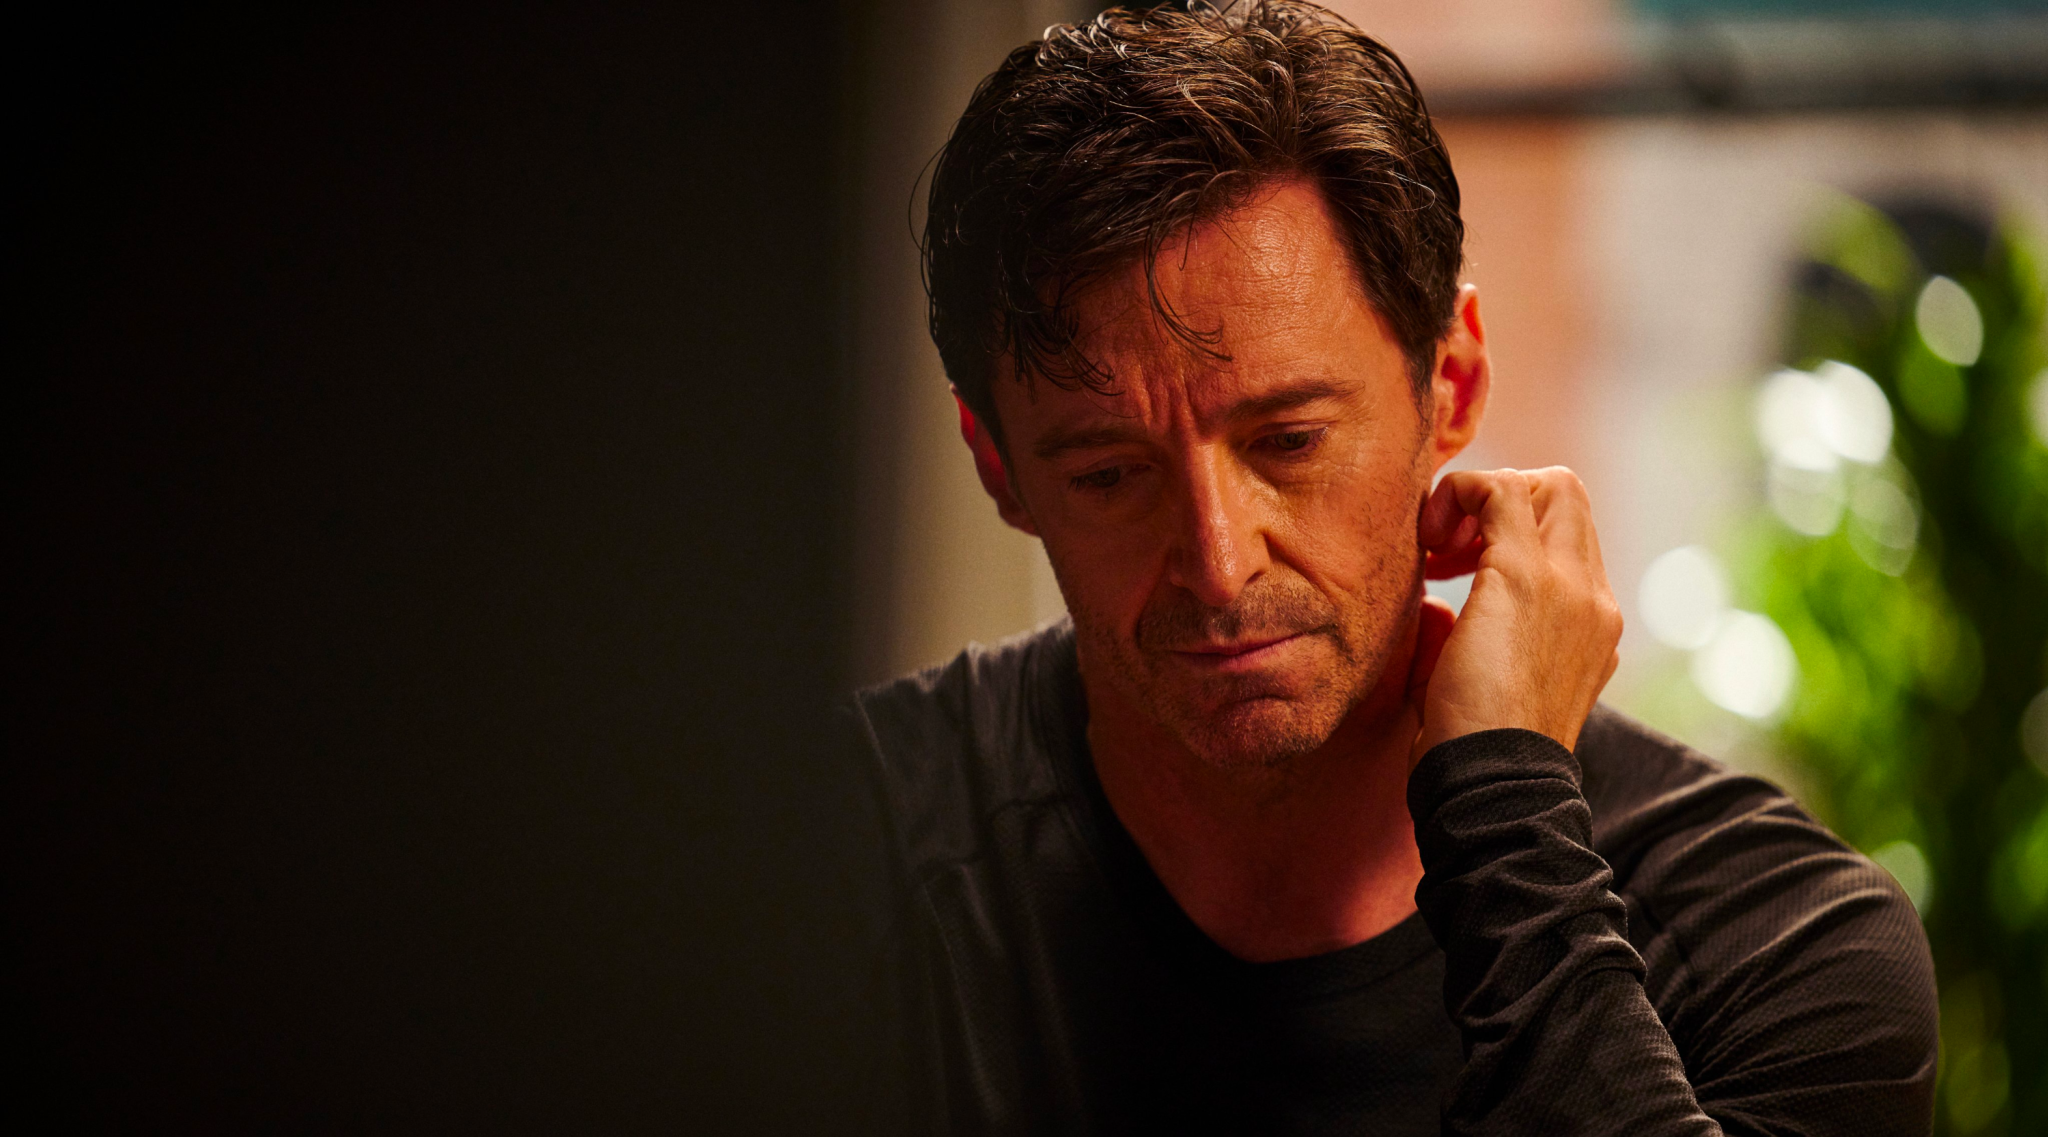 'The Son' Trailer: Hugh Jackman and Laura Dern Star in the Complex Family Drama